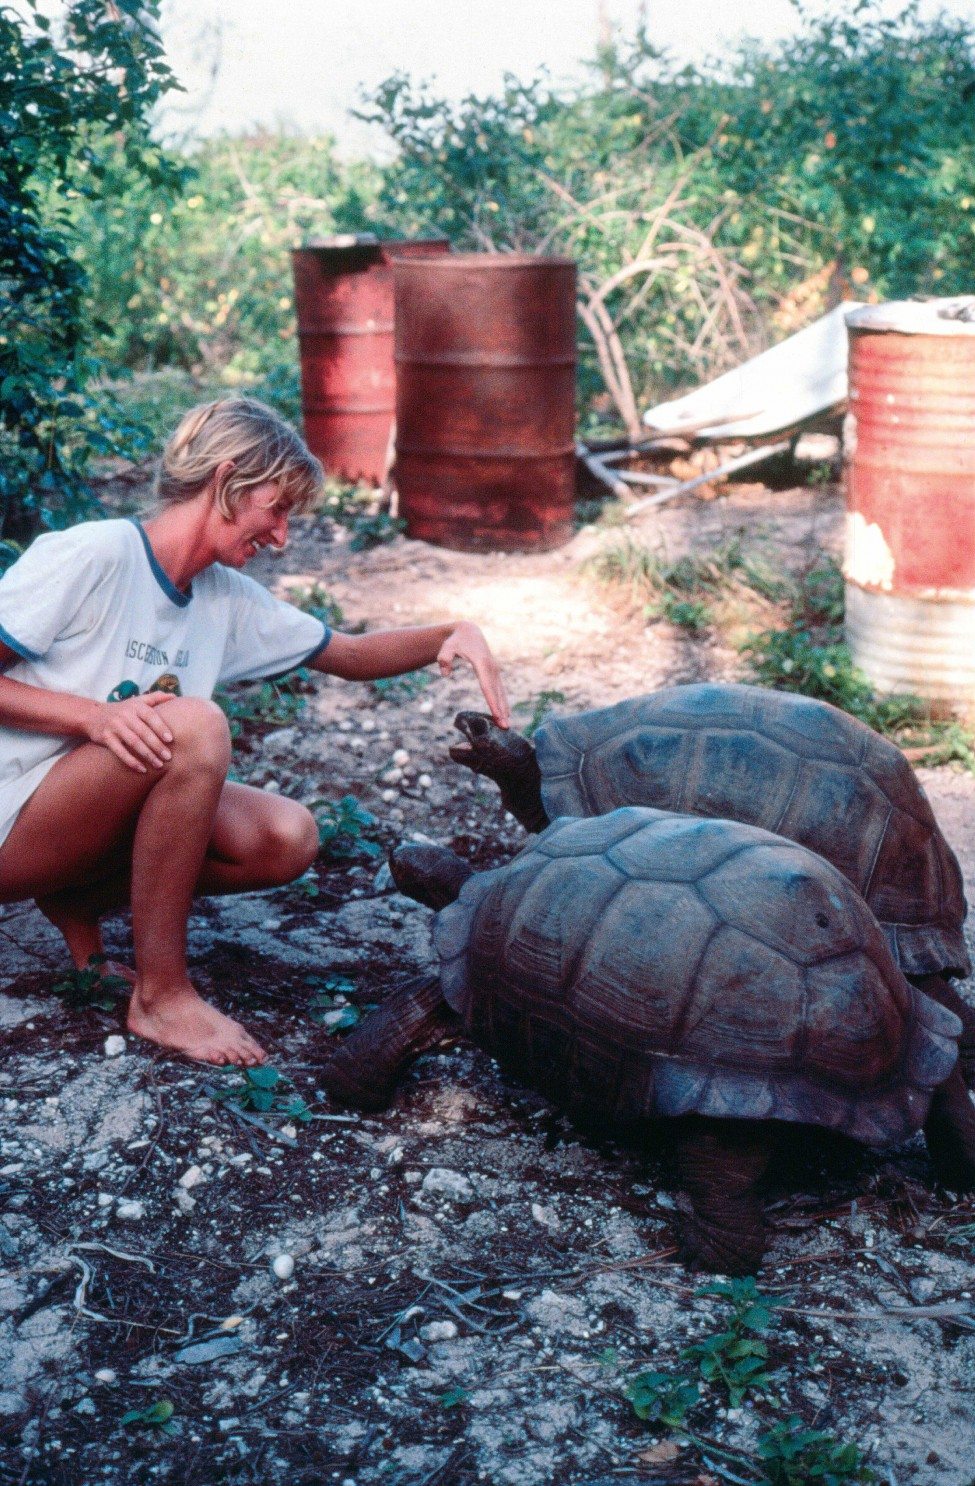 Jeanne Mortimer with giant tortoises on Aldabra Atoll in the Seychelles in 1982, soon after she arrived in the country to help assess the status of its sea turtle populations.<br />
Photo by Jeanne Mortimer